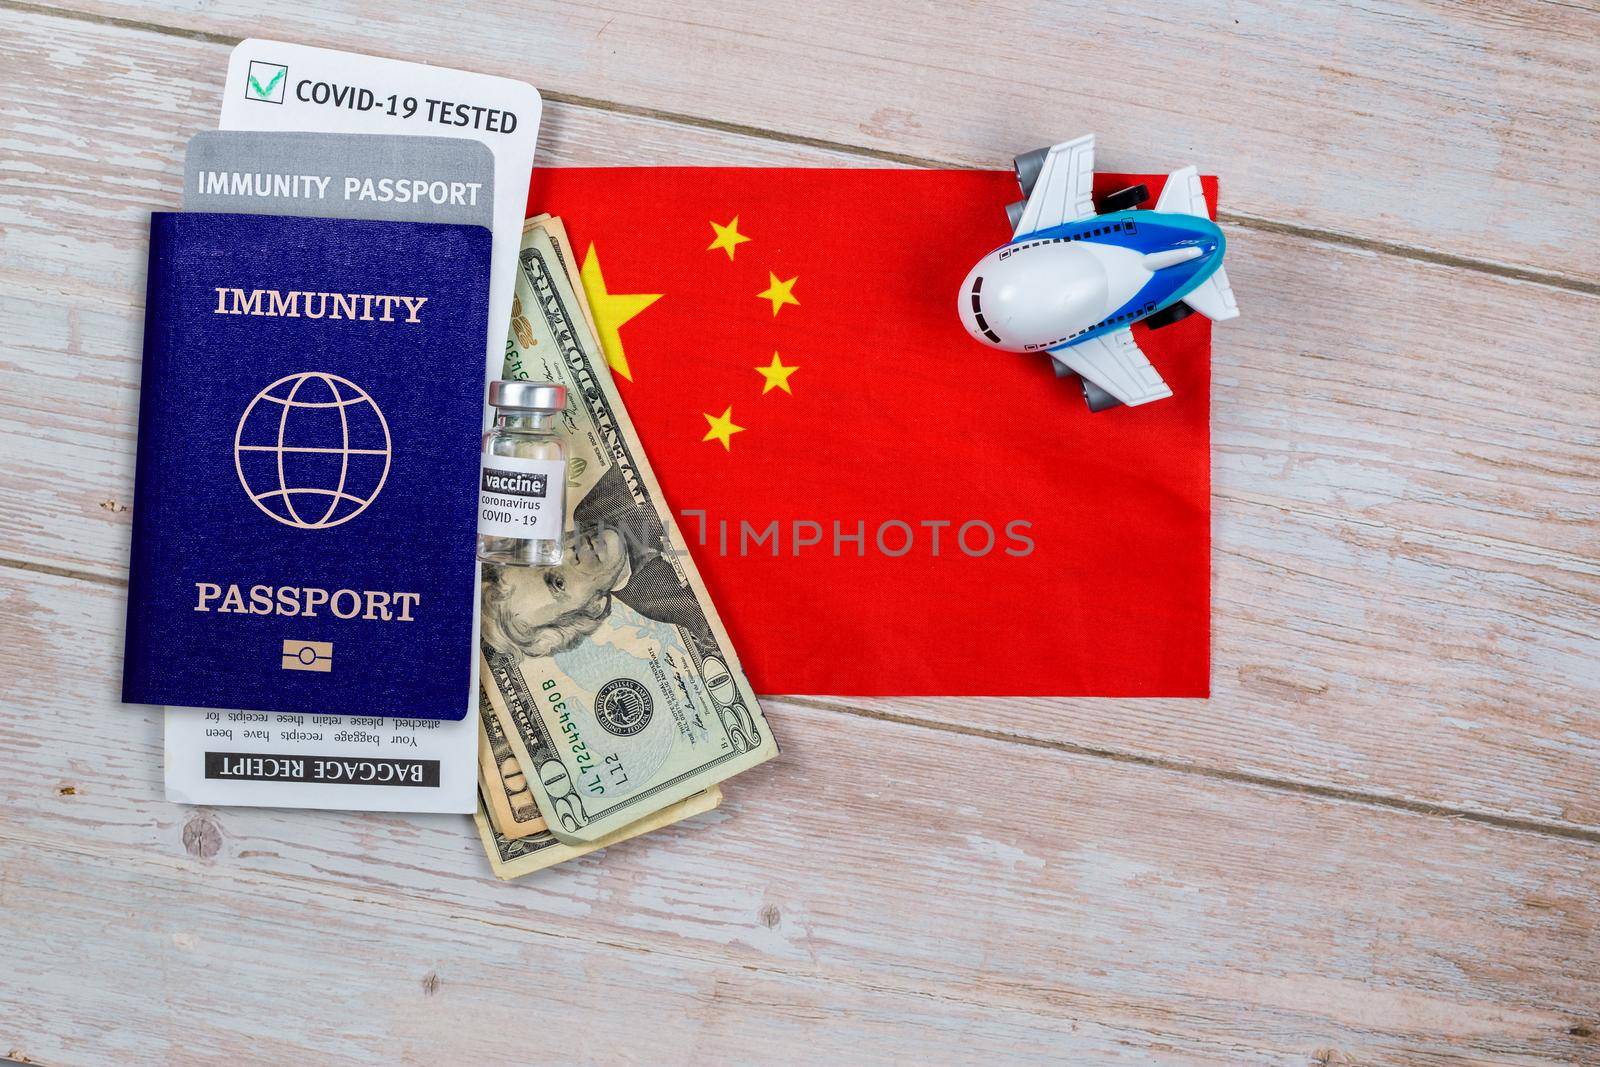 Concept of immunity to coronavirus. Certificate stating that person is not contagious. Passport with note covid-19 test passed, money, vaccine bottle and a toy plane on flag of China